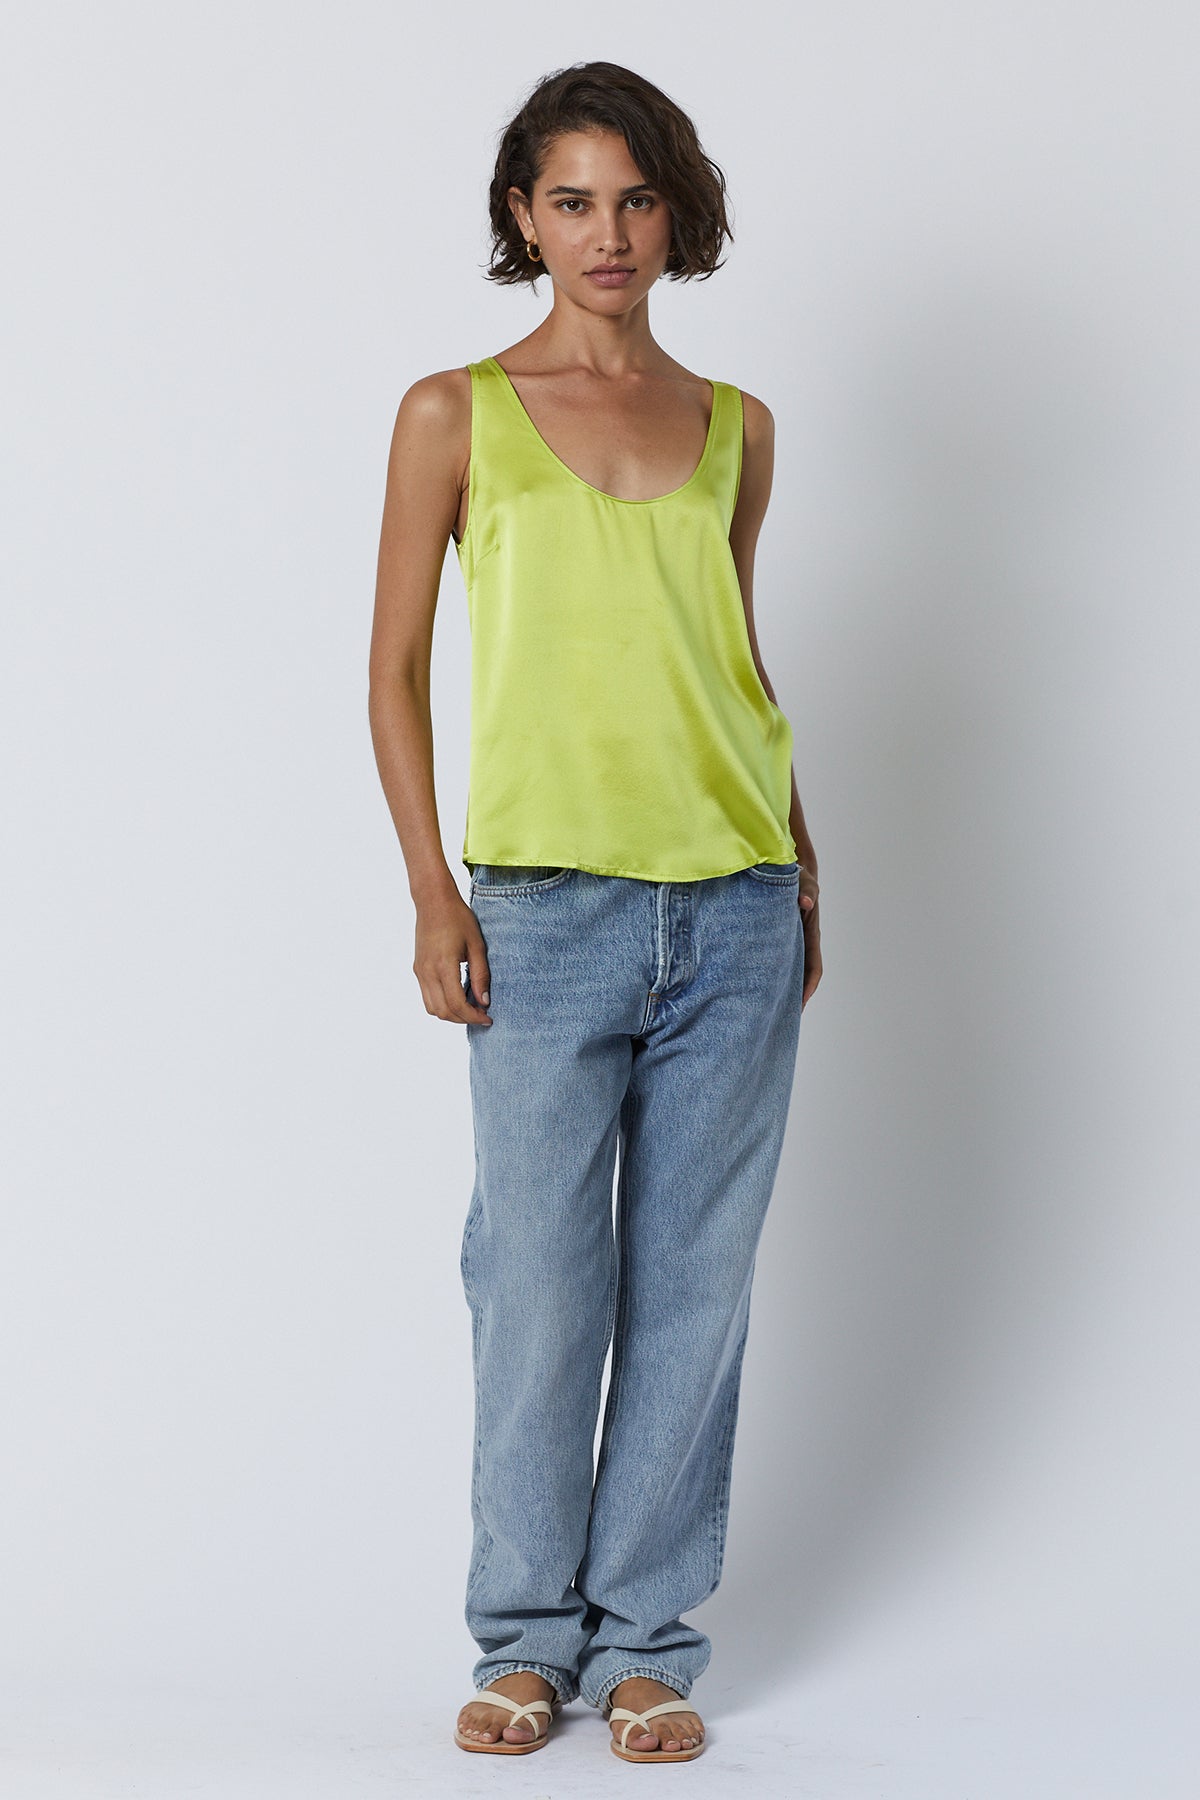 Nolita Tank Top in lime green with blue denim full length front-26007163633857